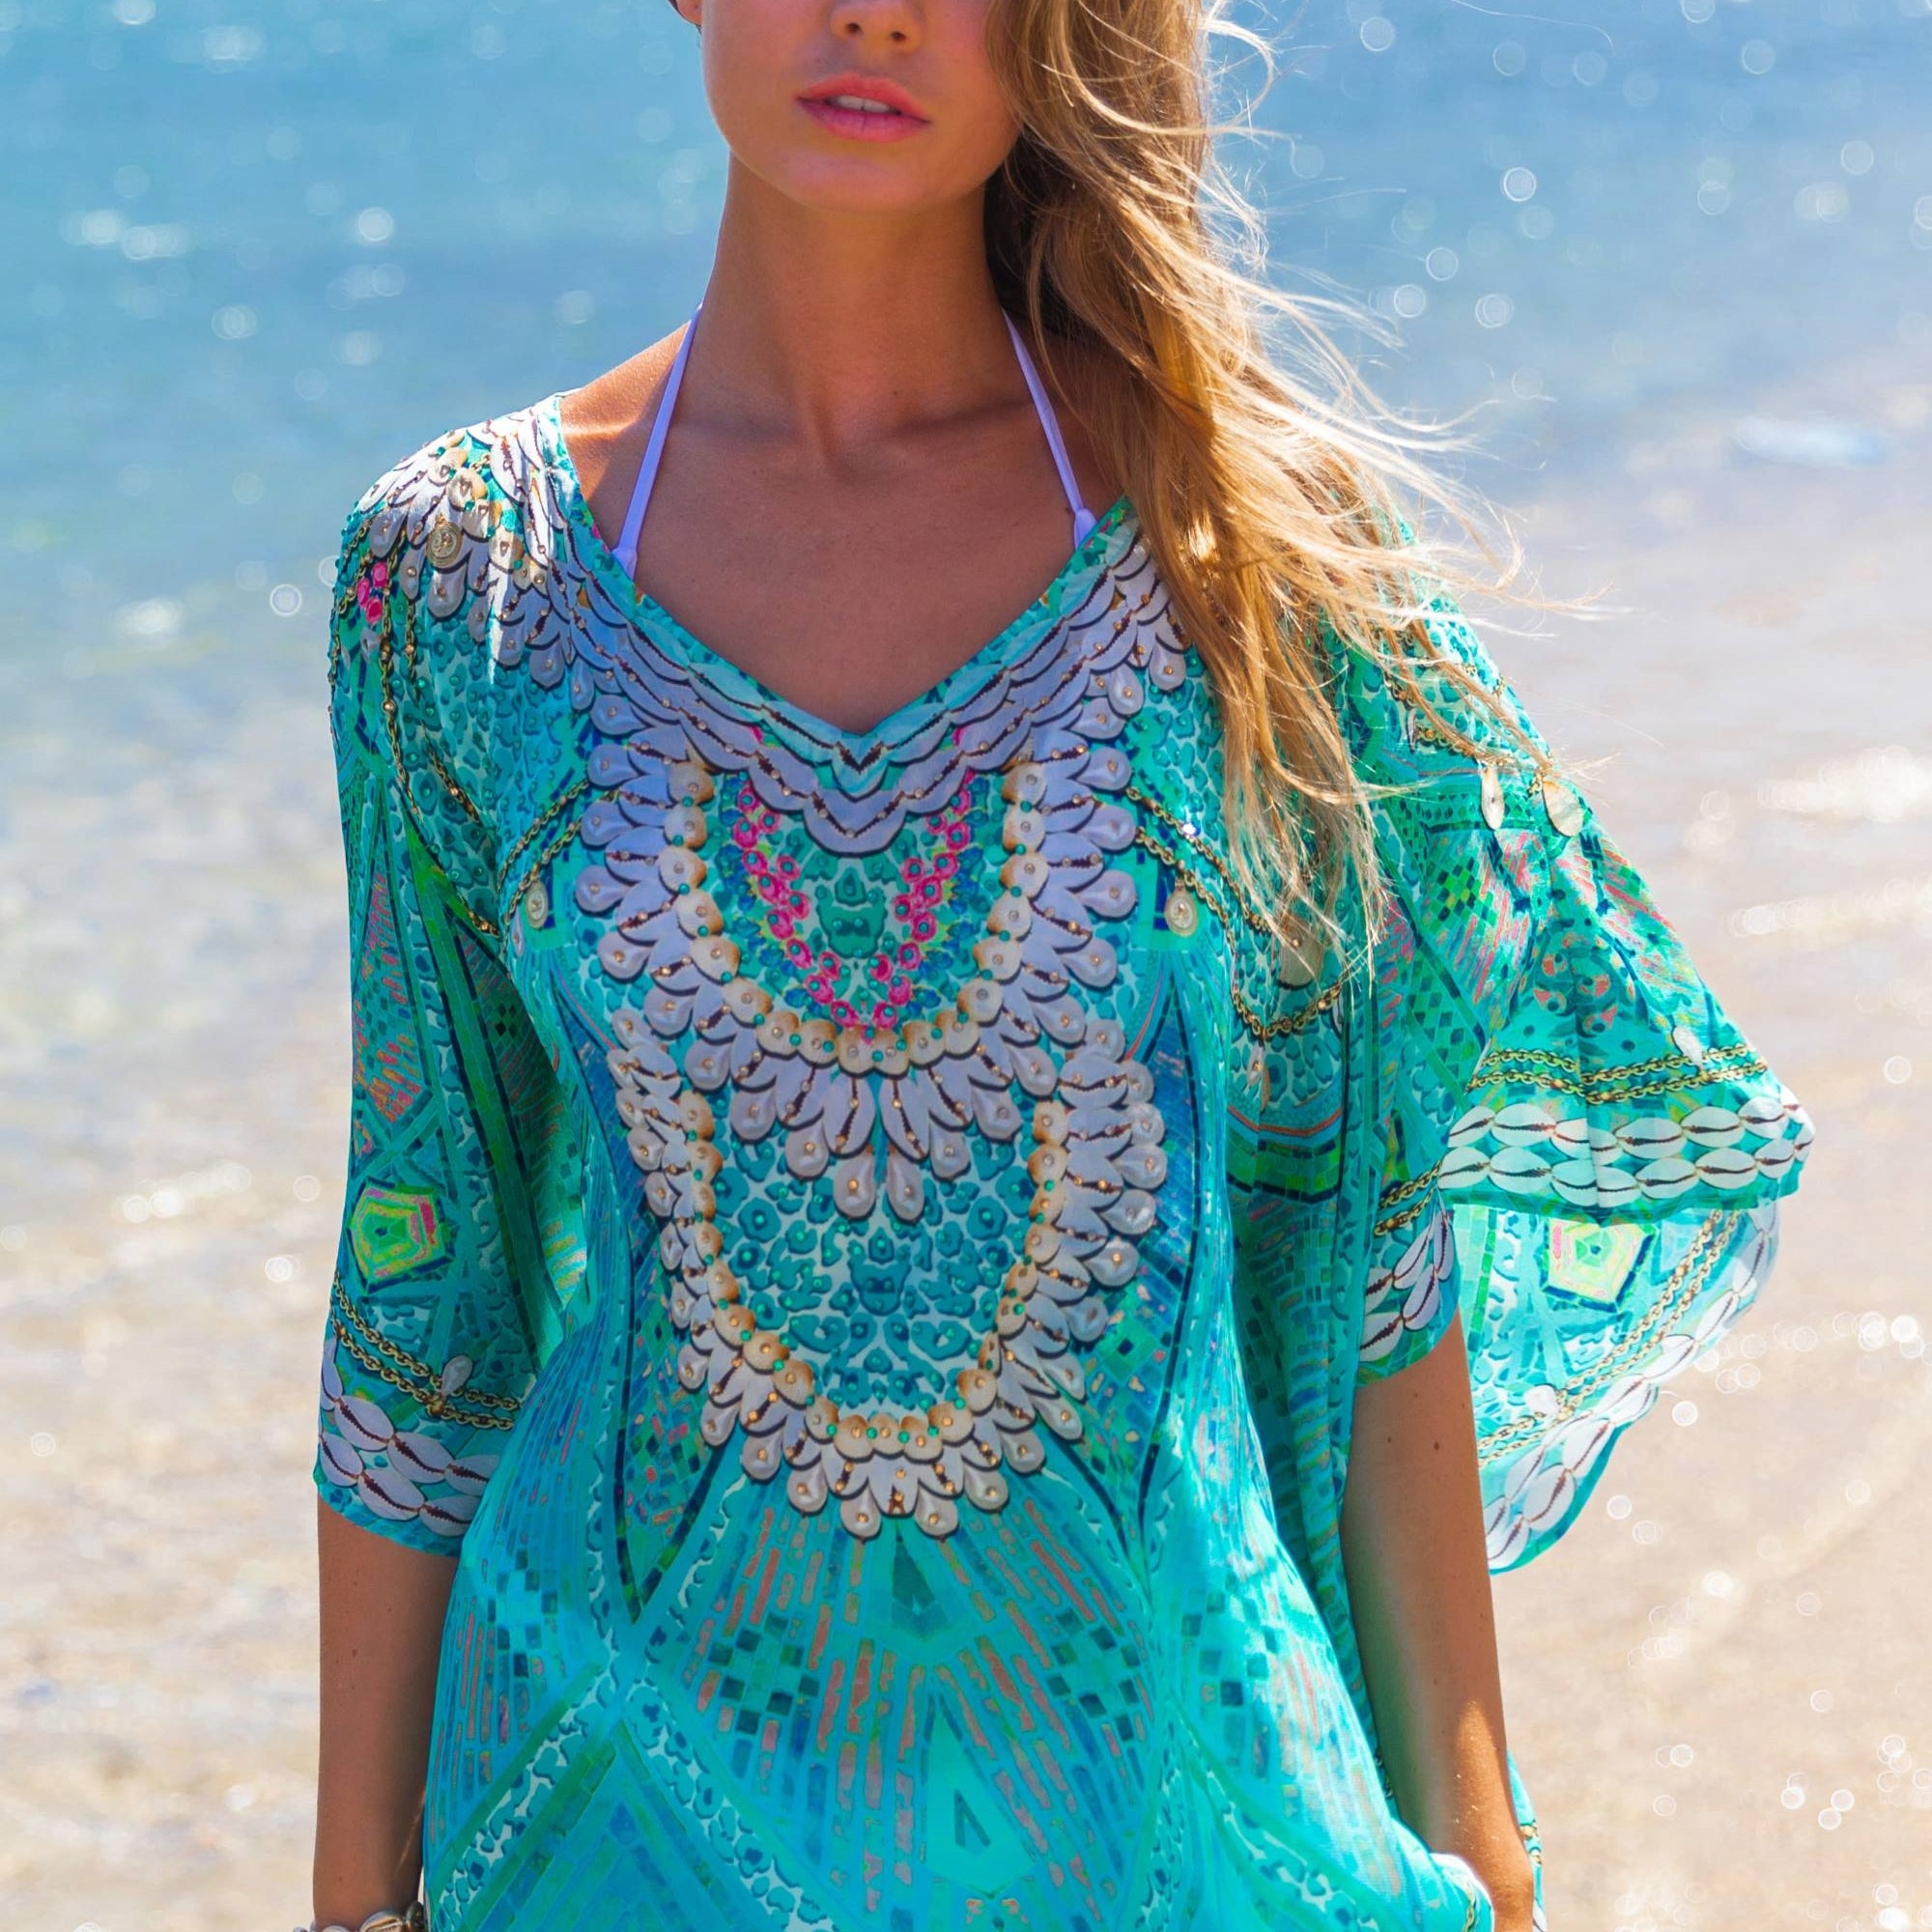 Petite sparkly silk designer beach kaftan, is a fabulous short floaty coverup by Lindsey Brown resort wear, perfect for petite frames to wear as beachwear